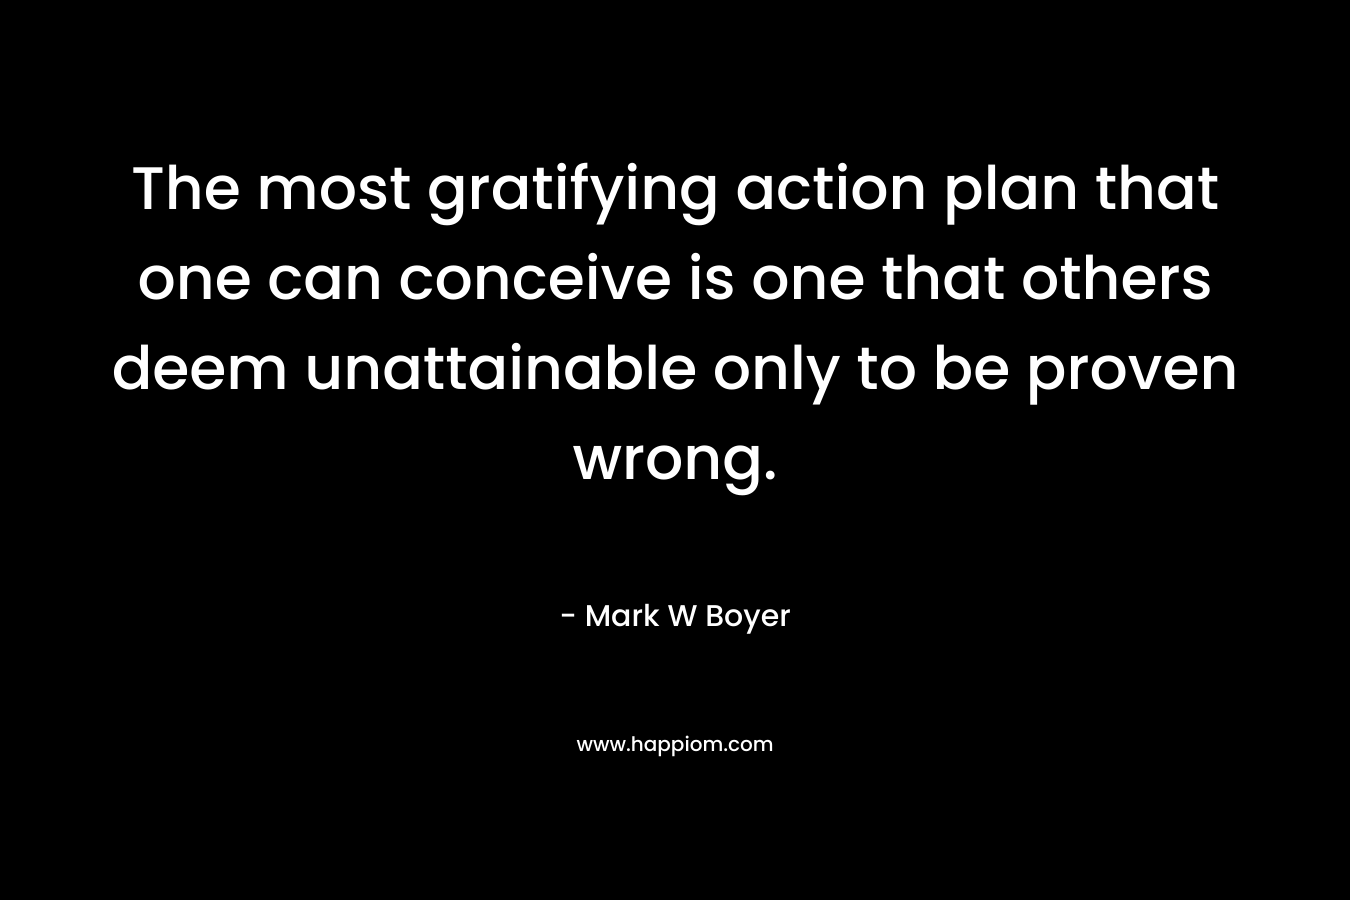 The most gratifying action plan that one can conceive is one that others deem unattainable only to be proven wrong. – Mark W Boyer